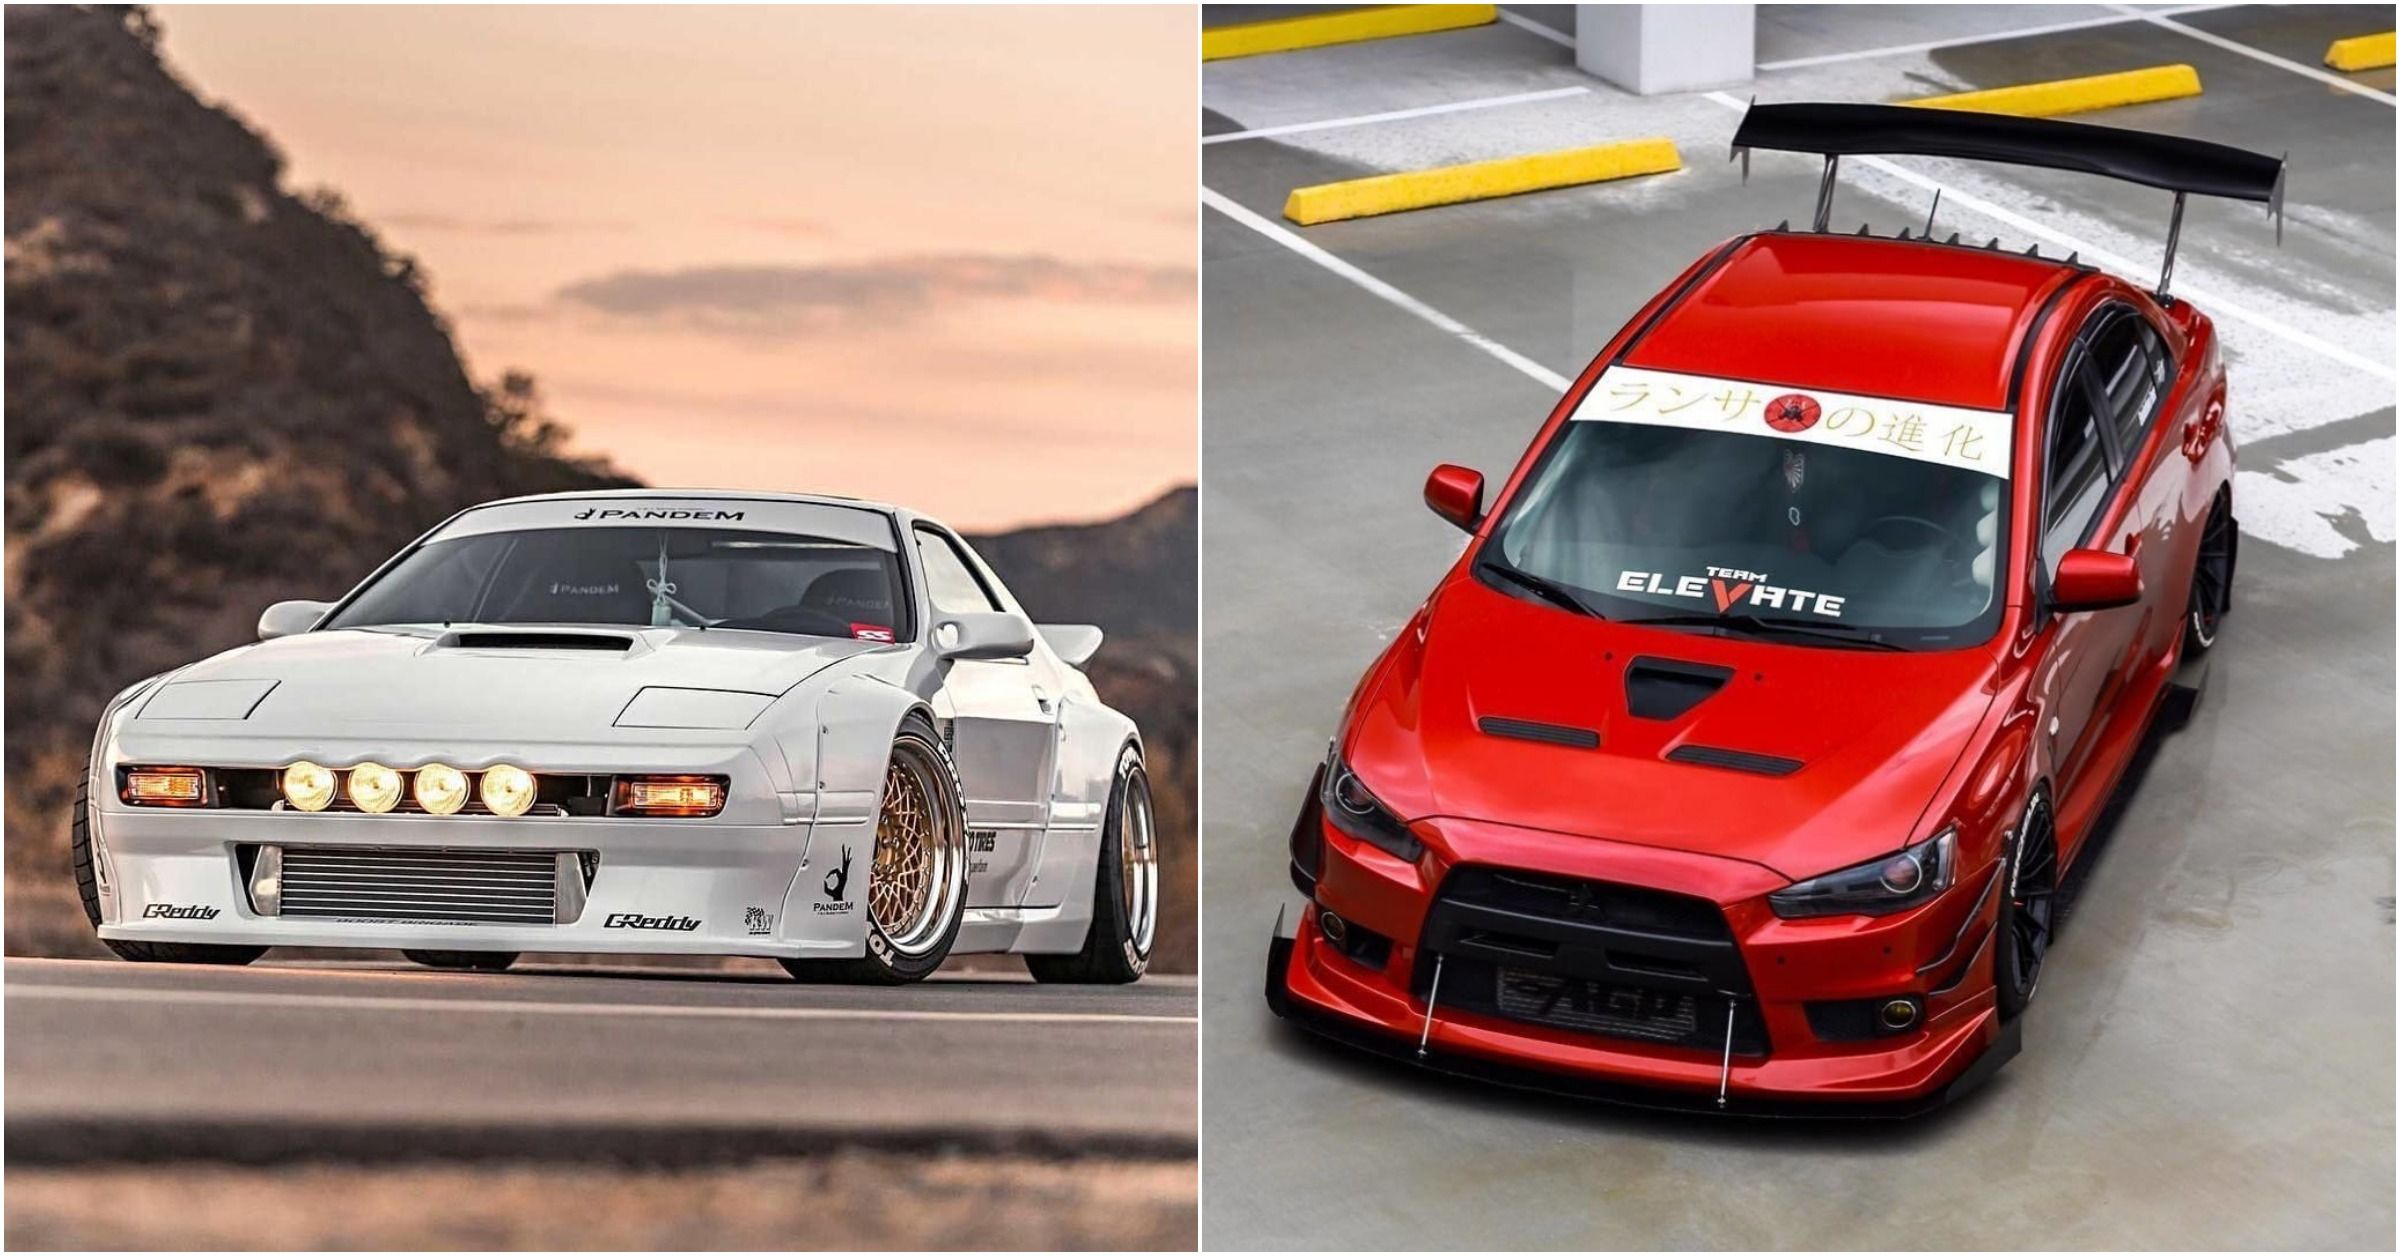 15 Japanese Sports Cars You Can Buy Pretty Cheap